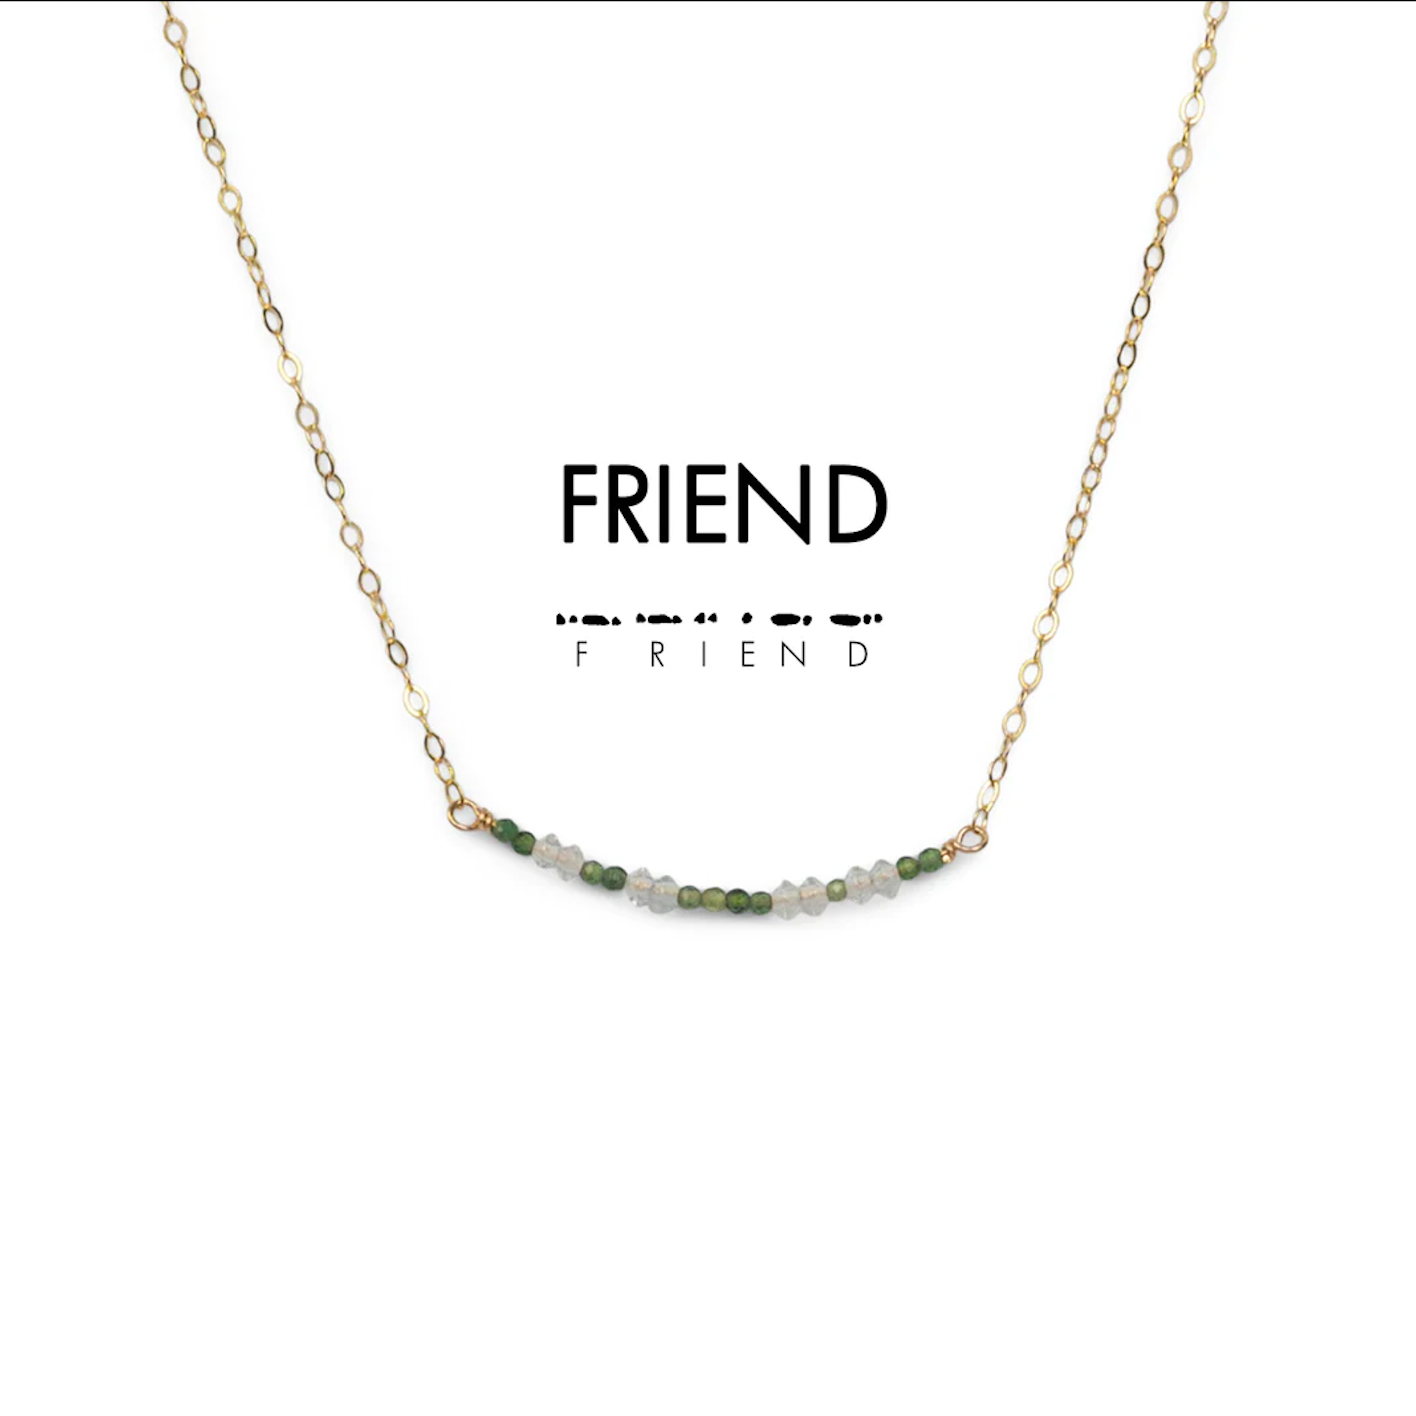 Ethic Goods Morse Code Dainty Stone Necklace - Friend